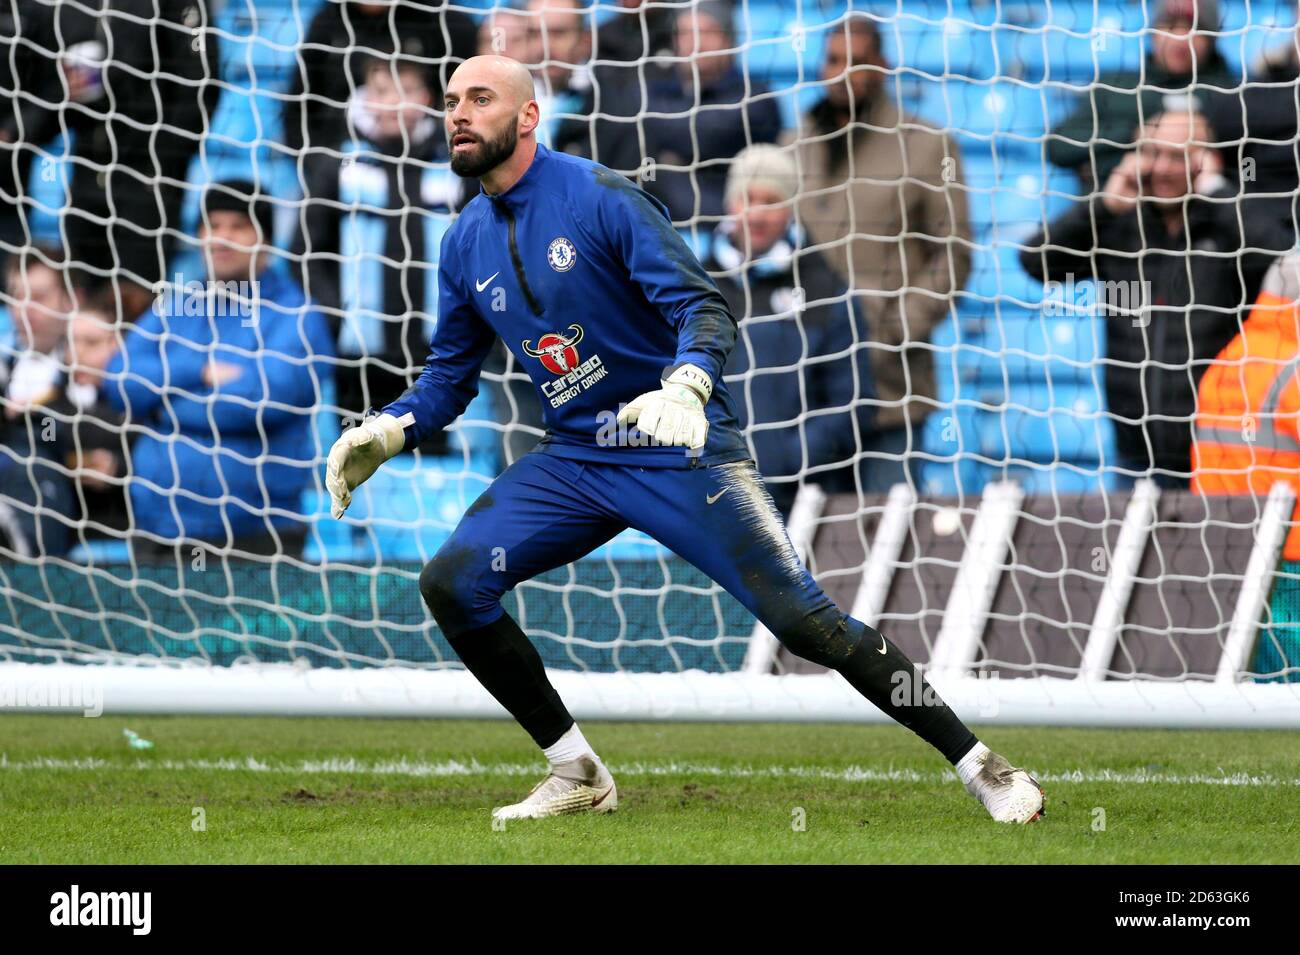 Chelsea goalkeeper Willy Caballero during the pre-match warm up prior to the beginning of the match Stock Photo